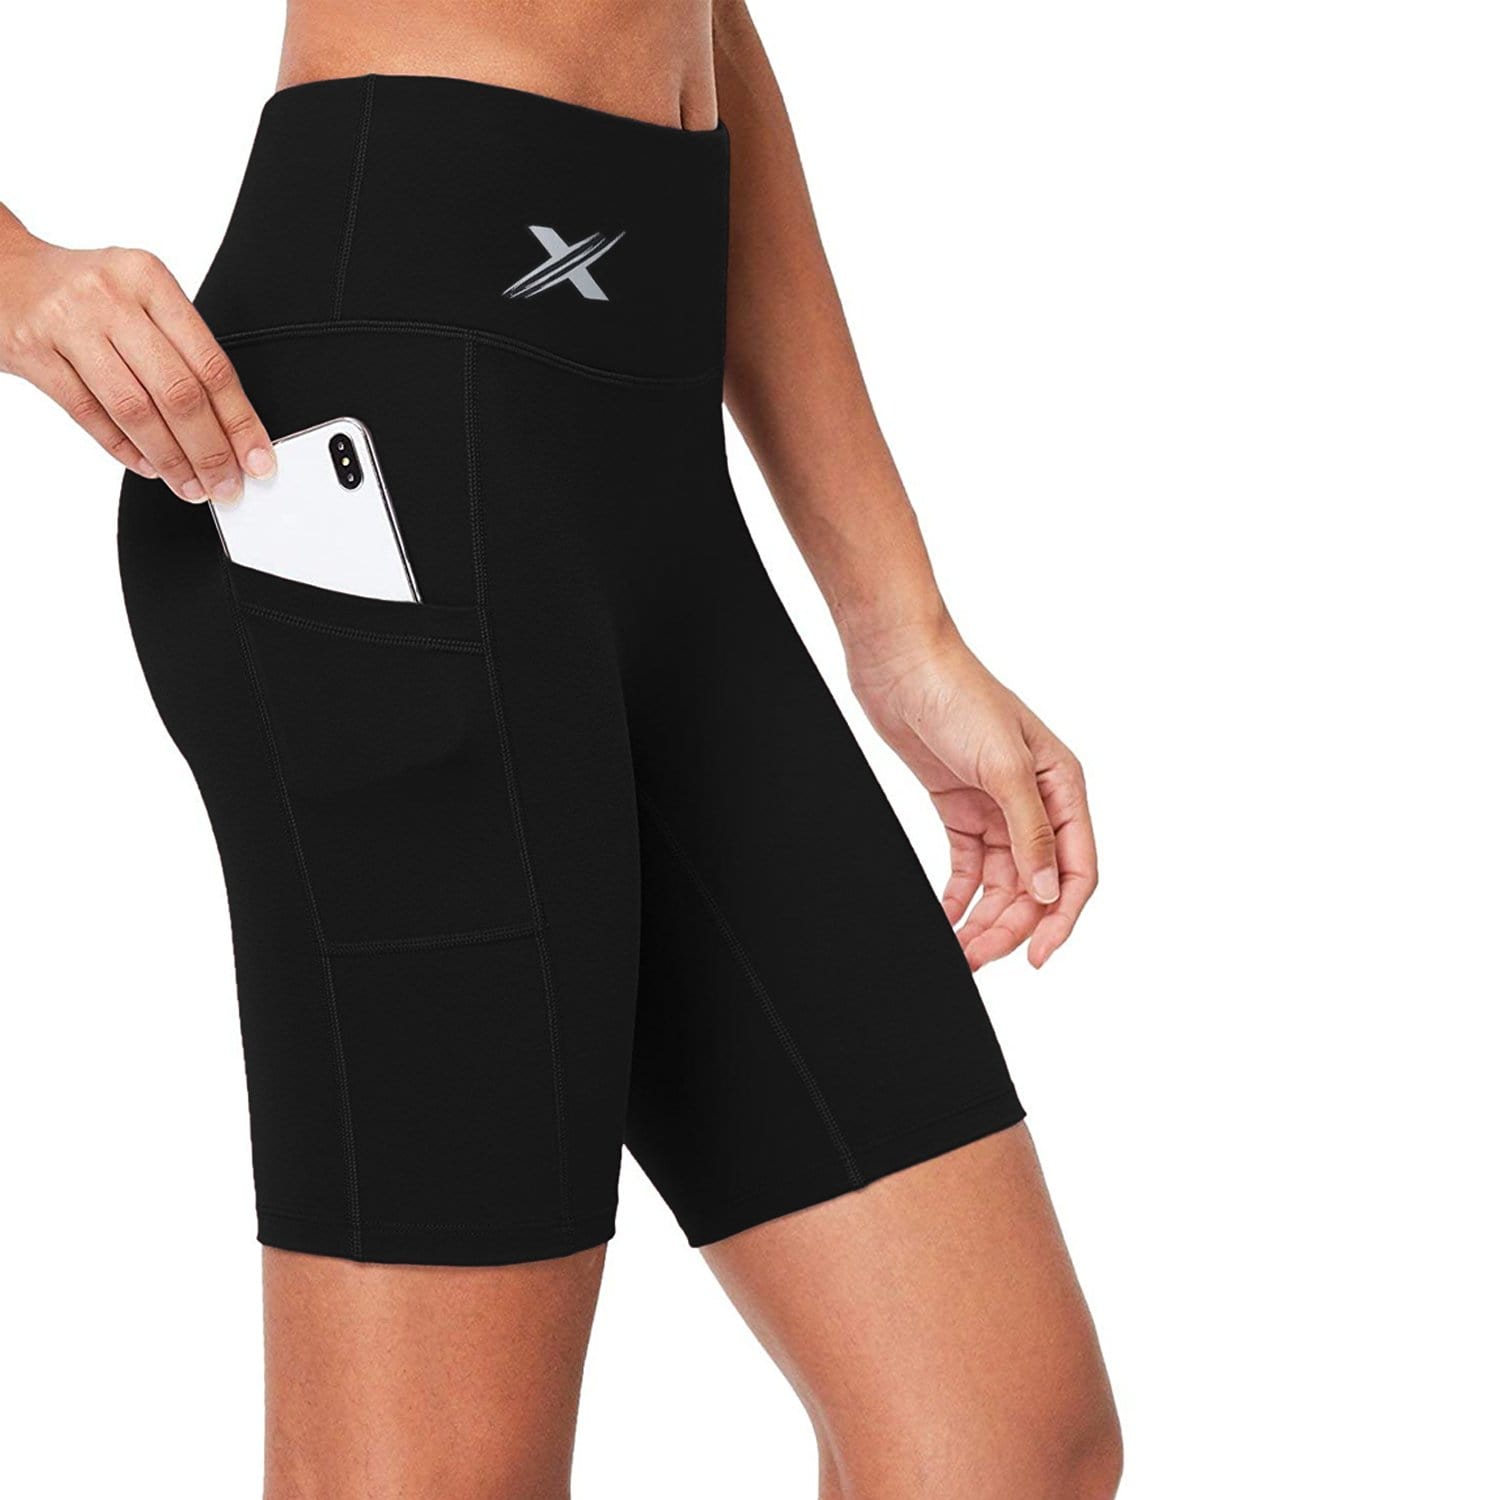 LuLu BURNING High Waisted So Perfect Yoga Shorts Buttery Soft Stretchy  Biker Workout Legging For Women 6 Inches From Ning07, $8.71